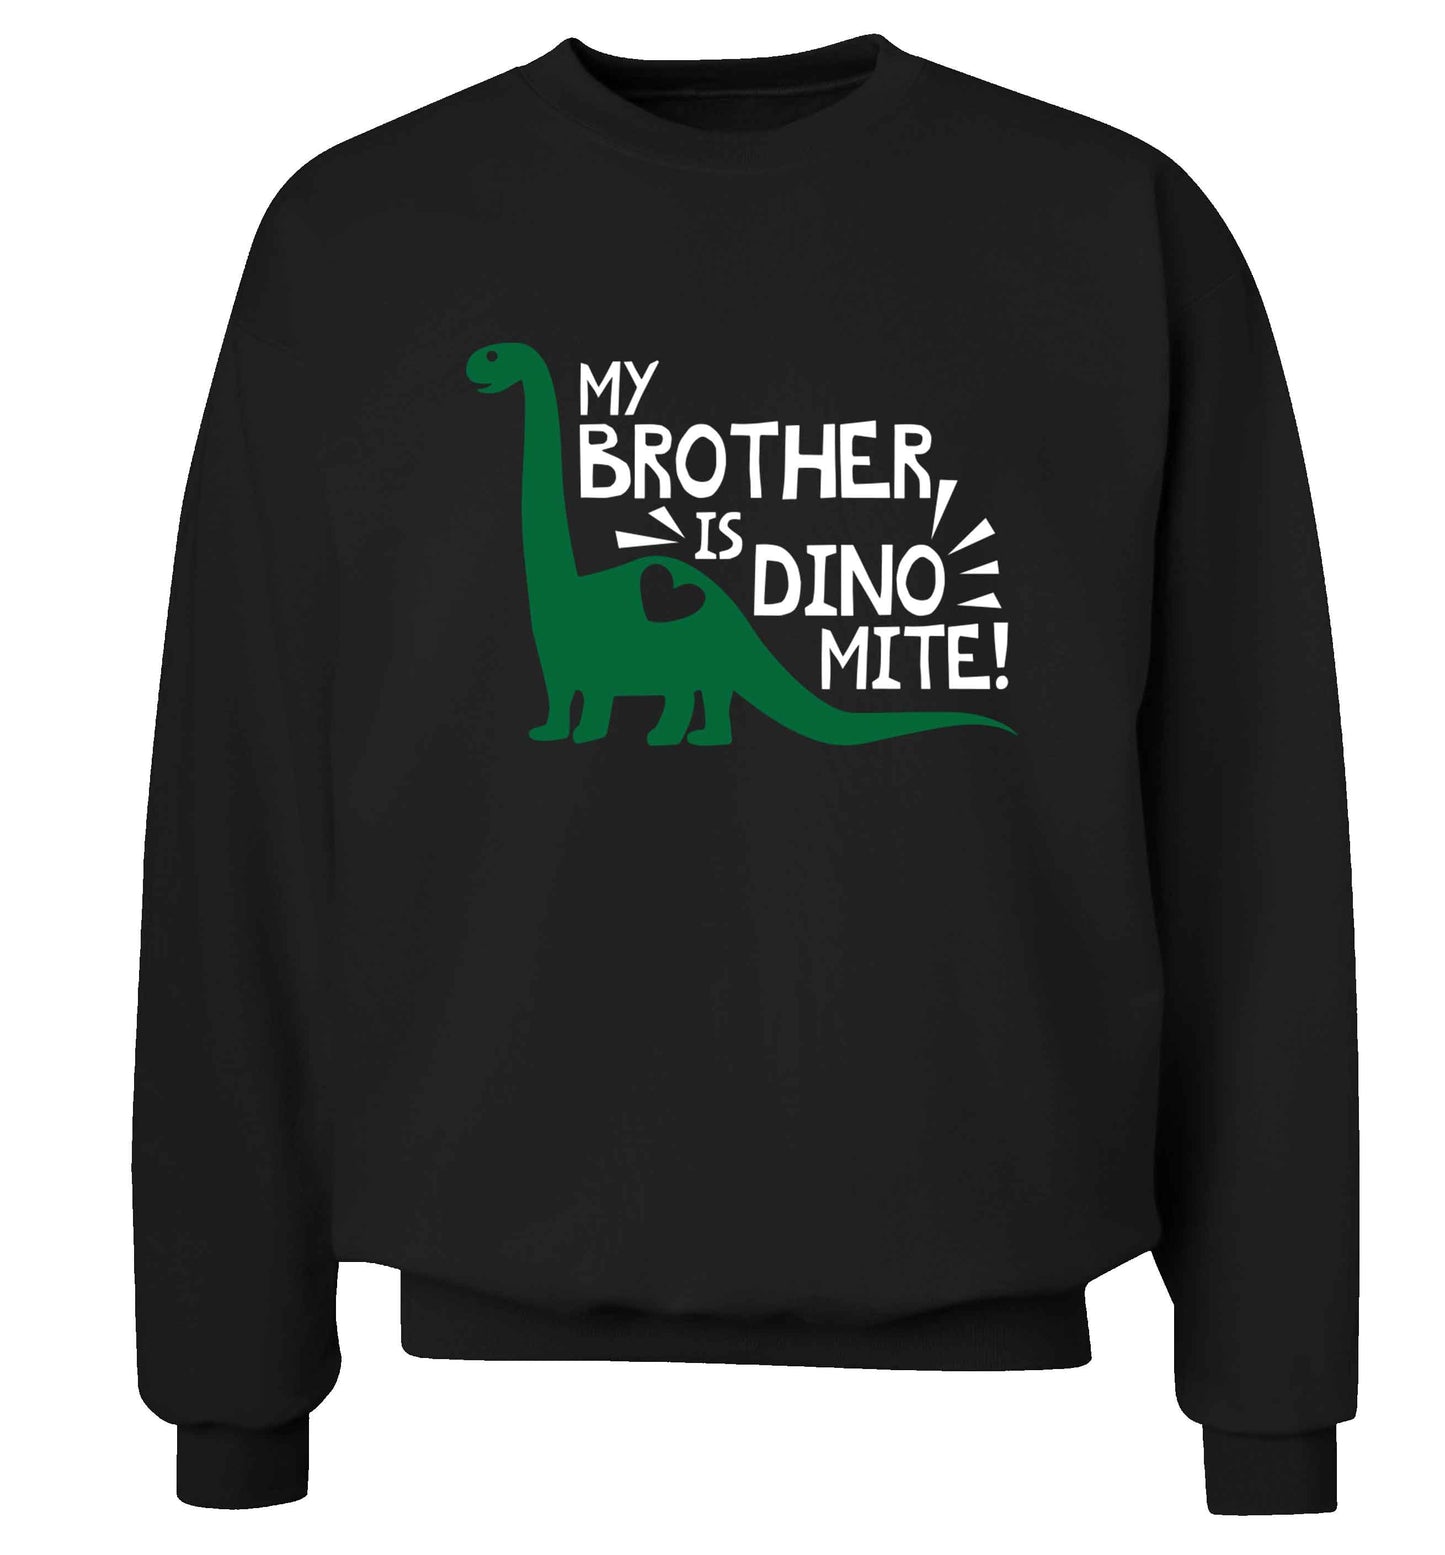 My brother is dinomite! Adult's unisex black Sweater 2XL